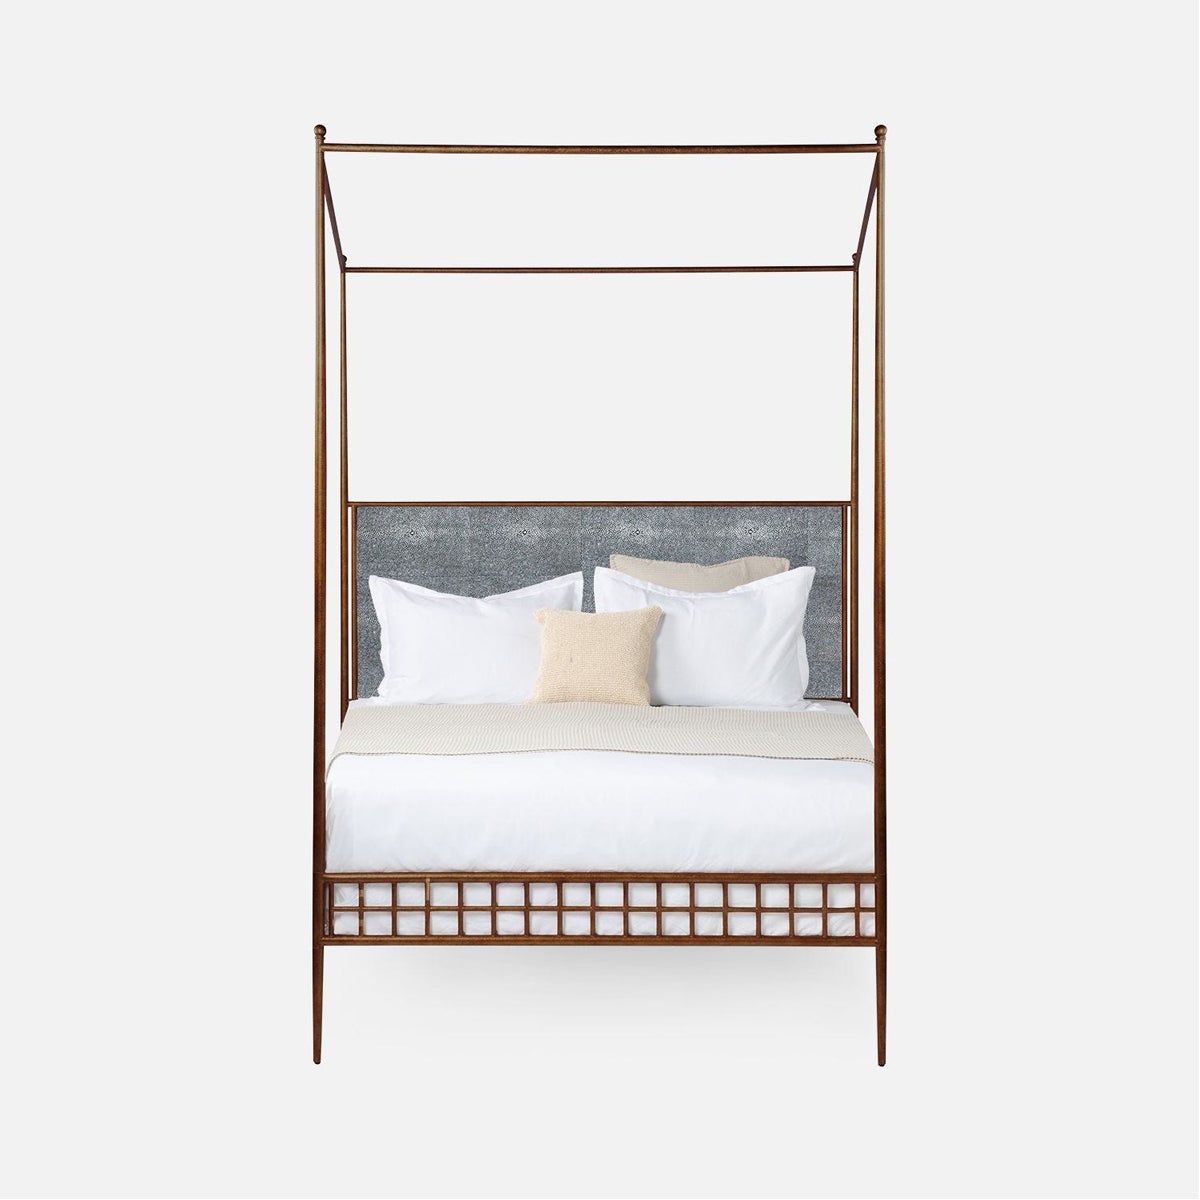 Made Goods Hamilton Textured Iron Canopy Bed in Kern Fabric